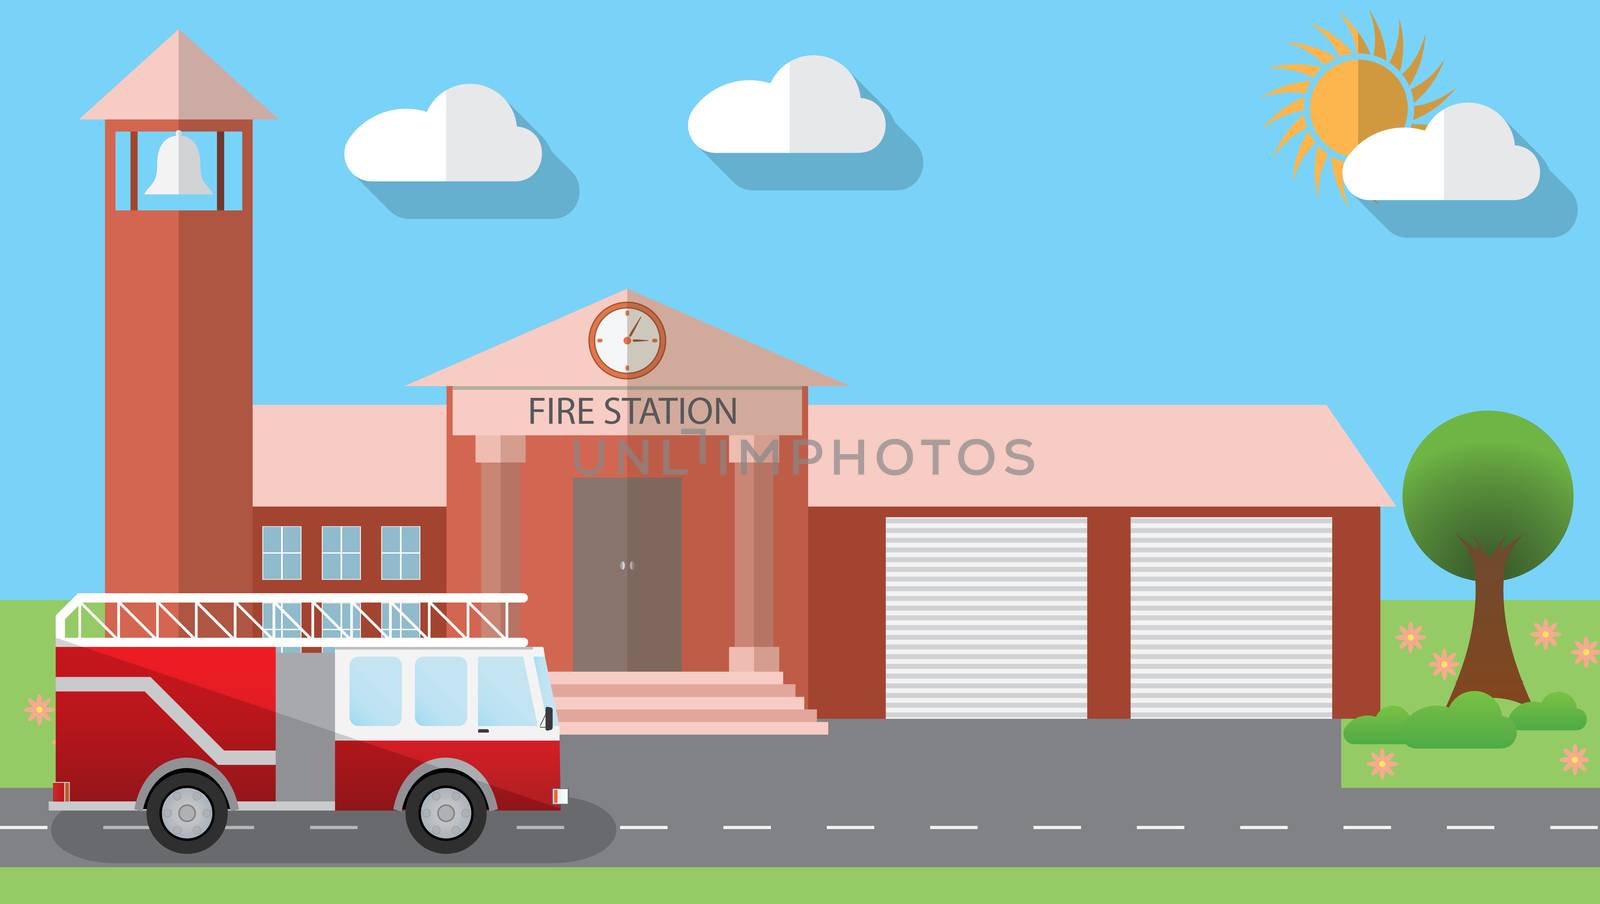 Flat design vector illustration of fire station building and parked fire truck in flat design style, vector illustration by Lemon_workshop